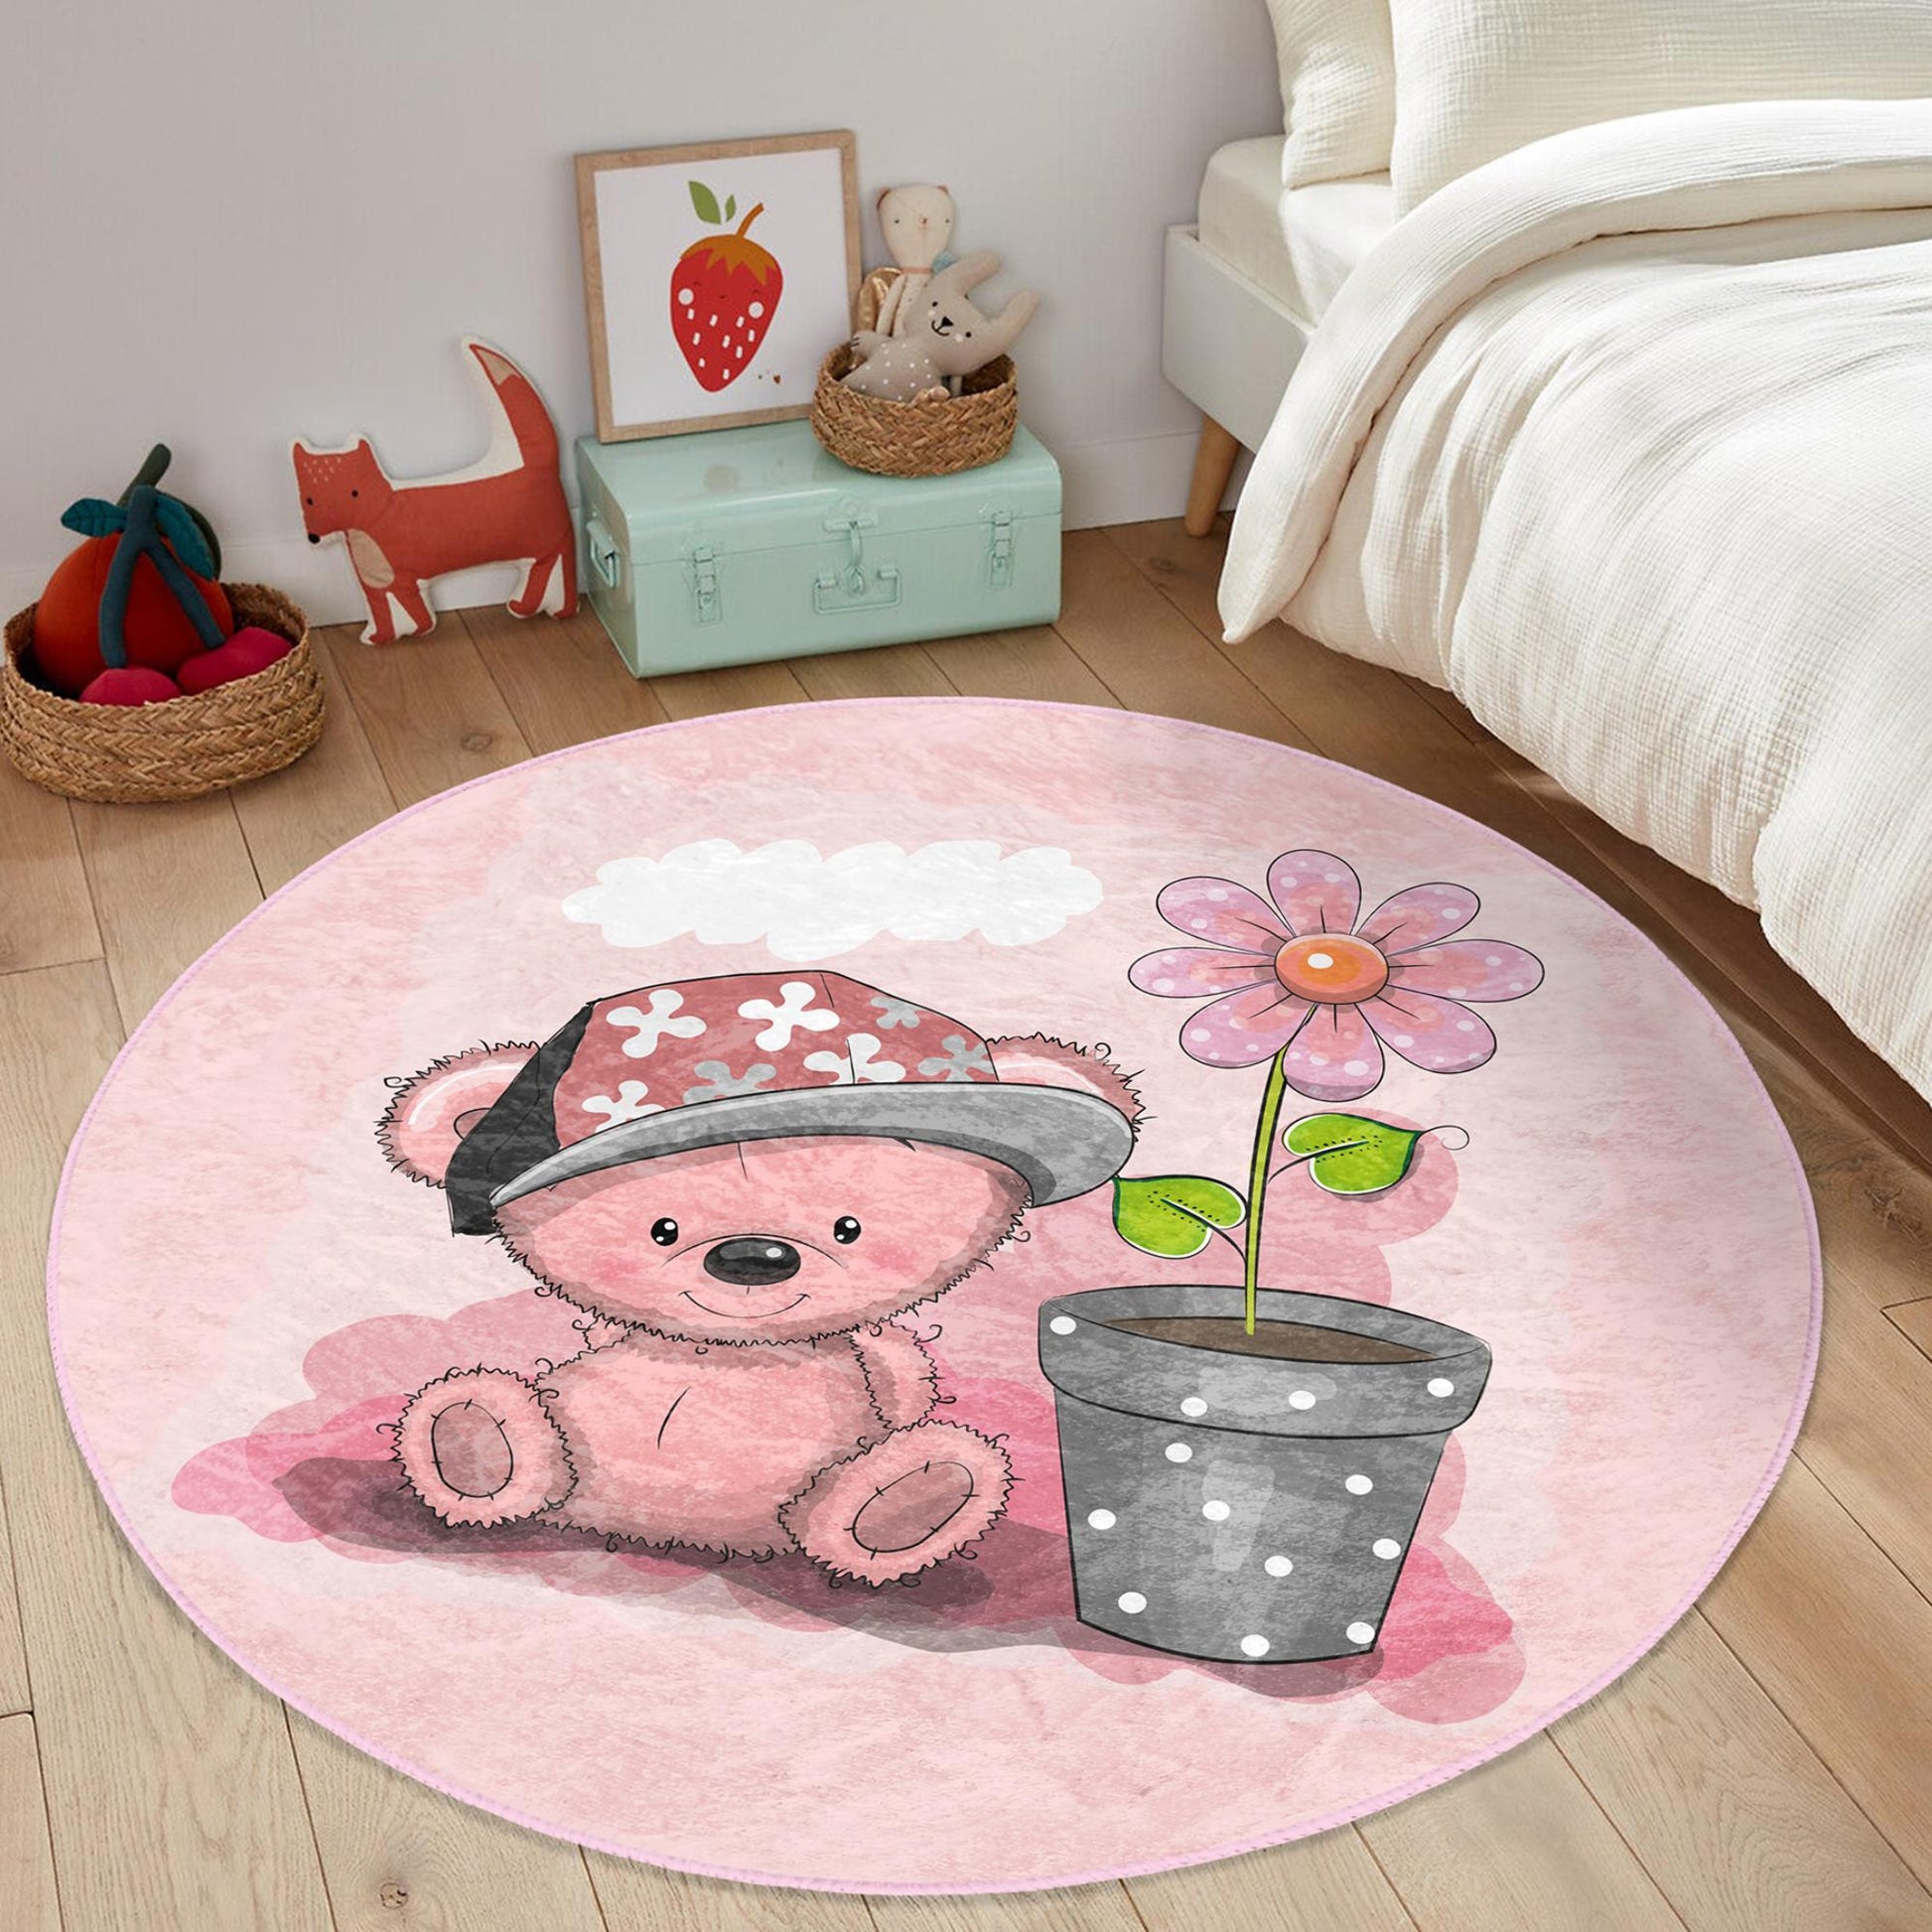 Charming girls rug adorned with a sweet pink bear design.